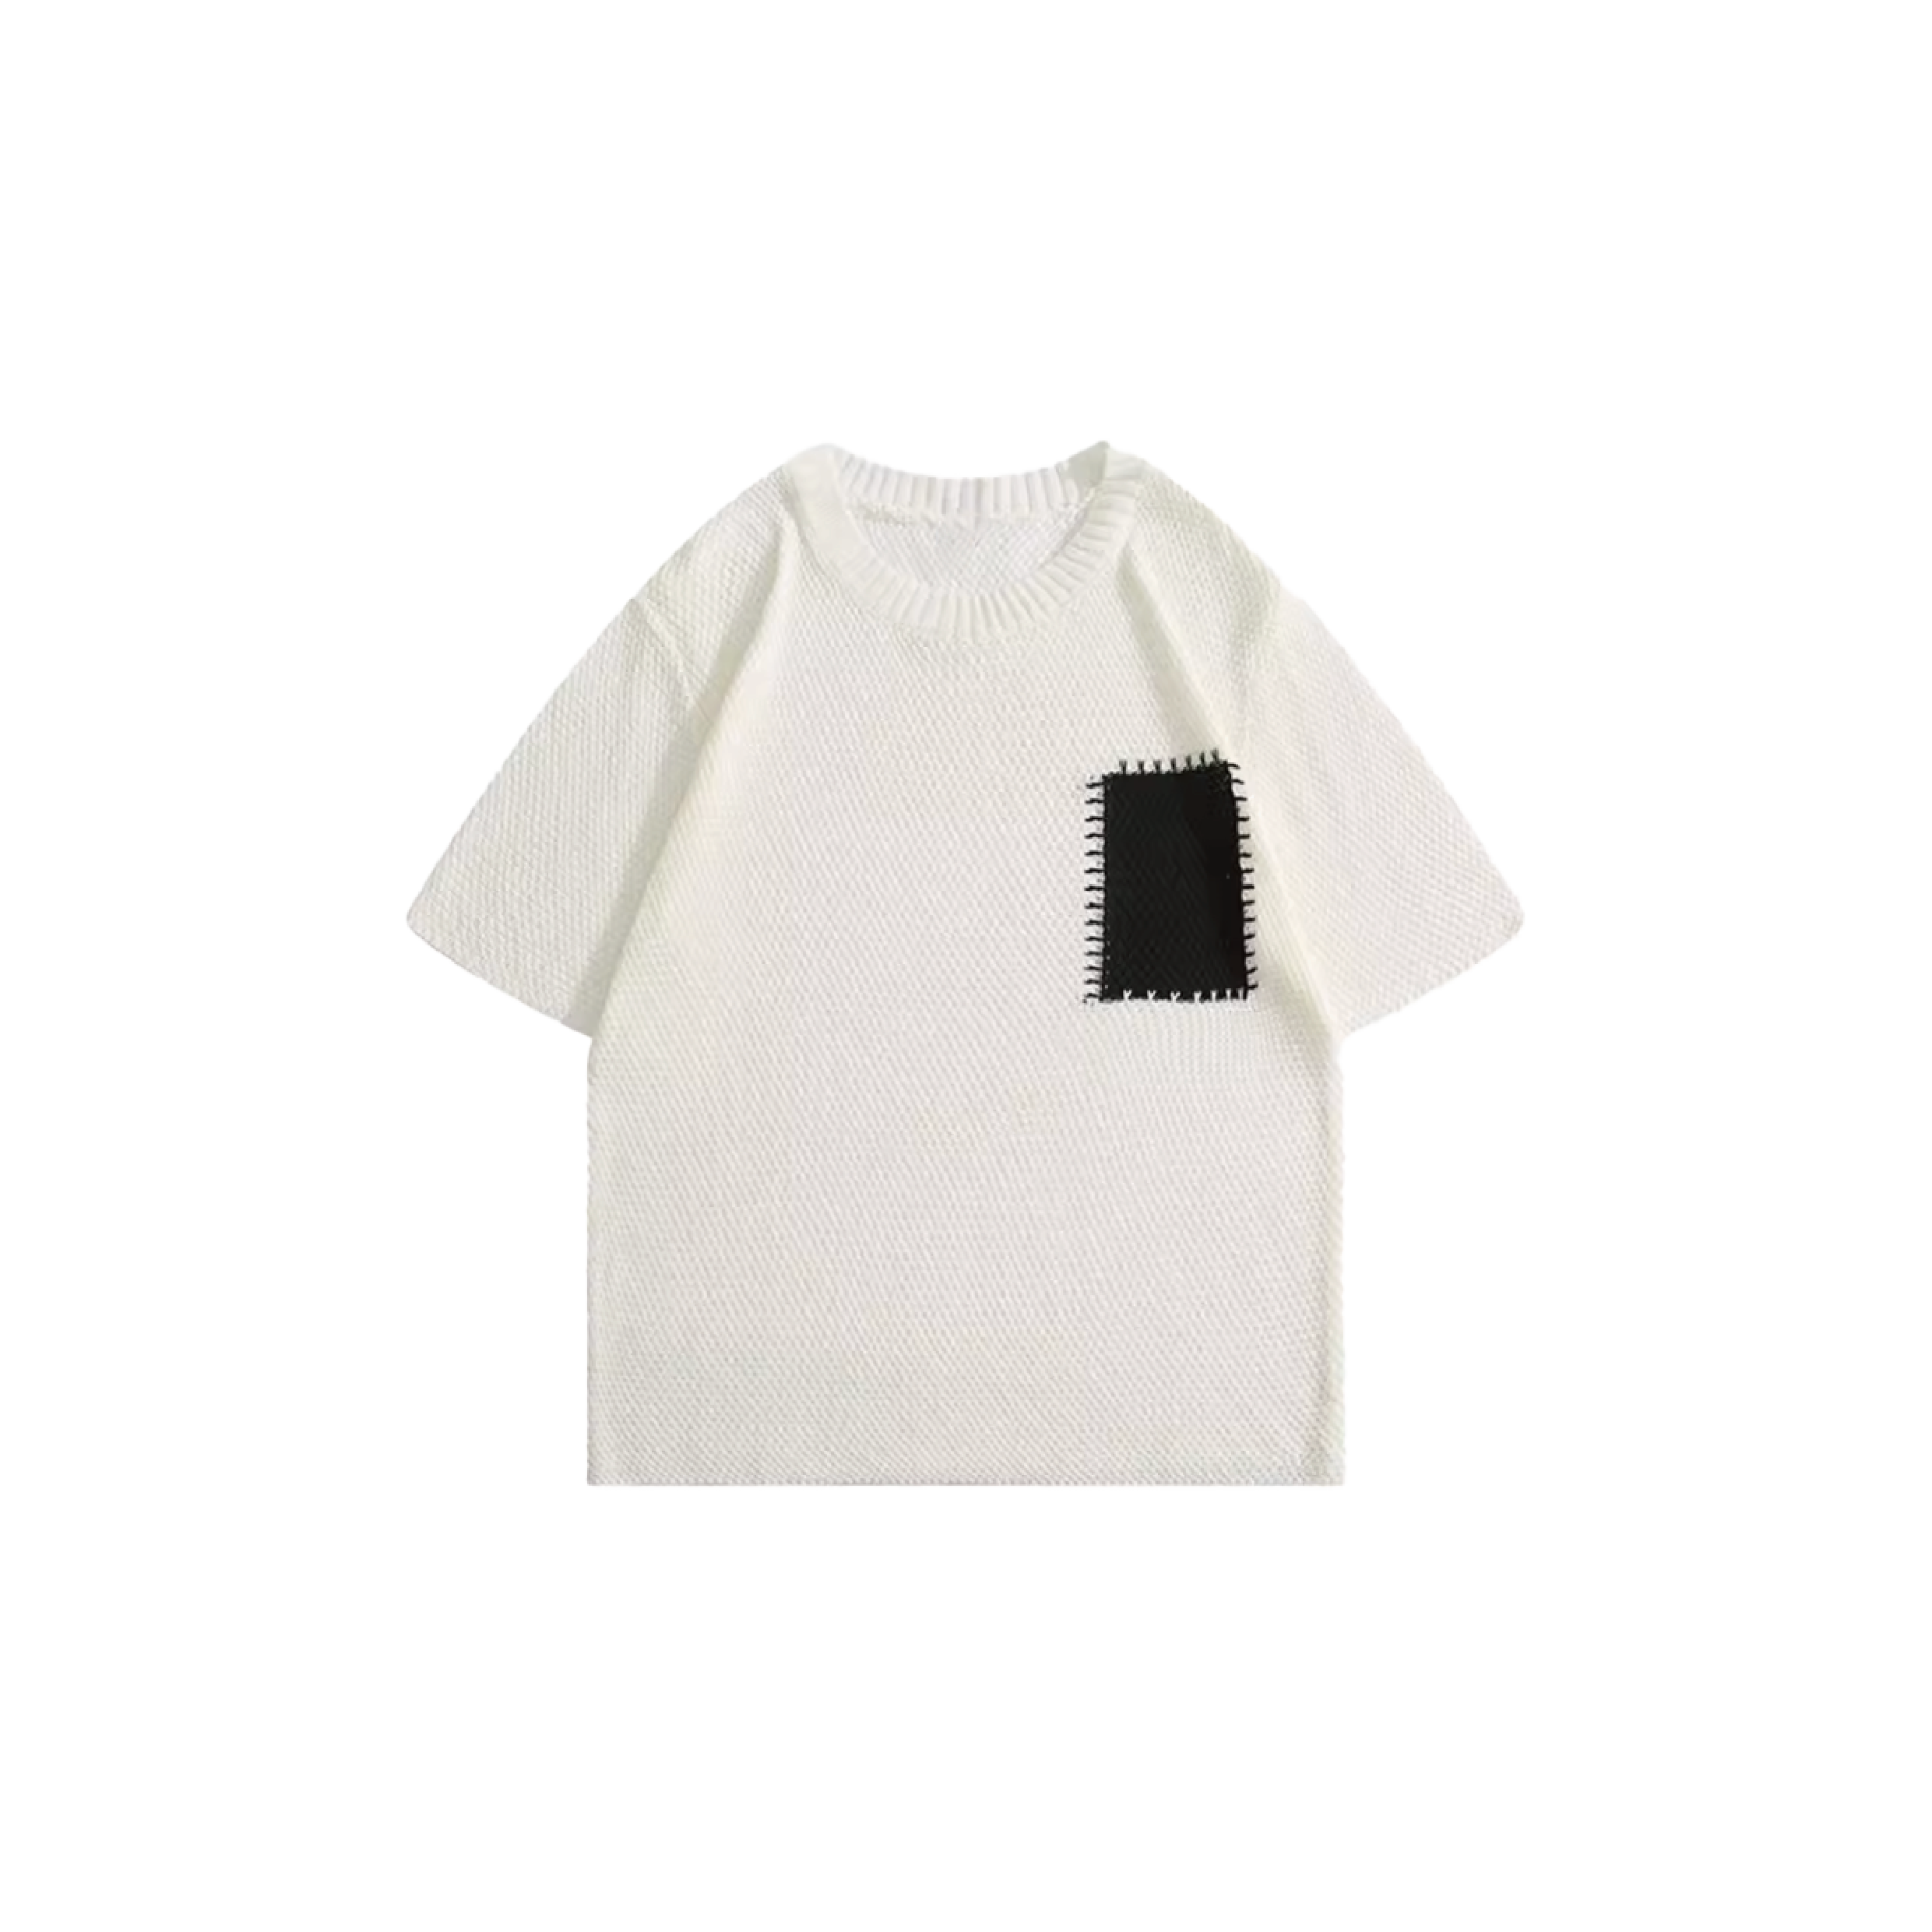 Stitched One Point T-shirt